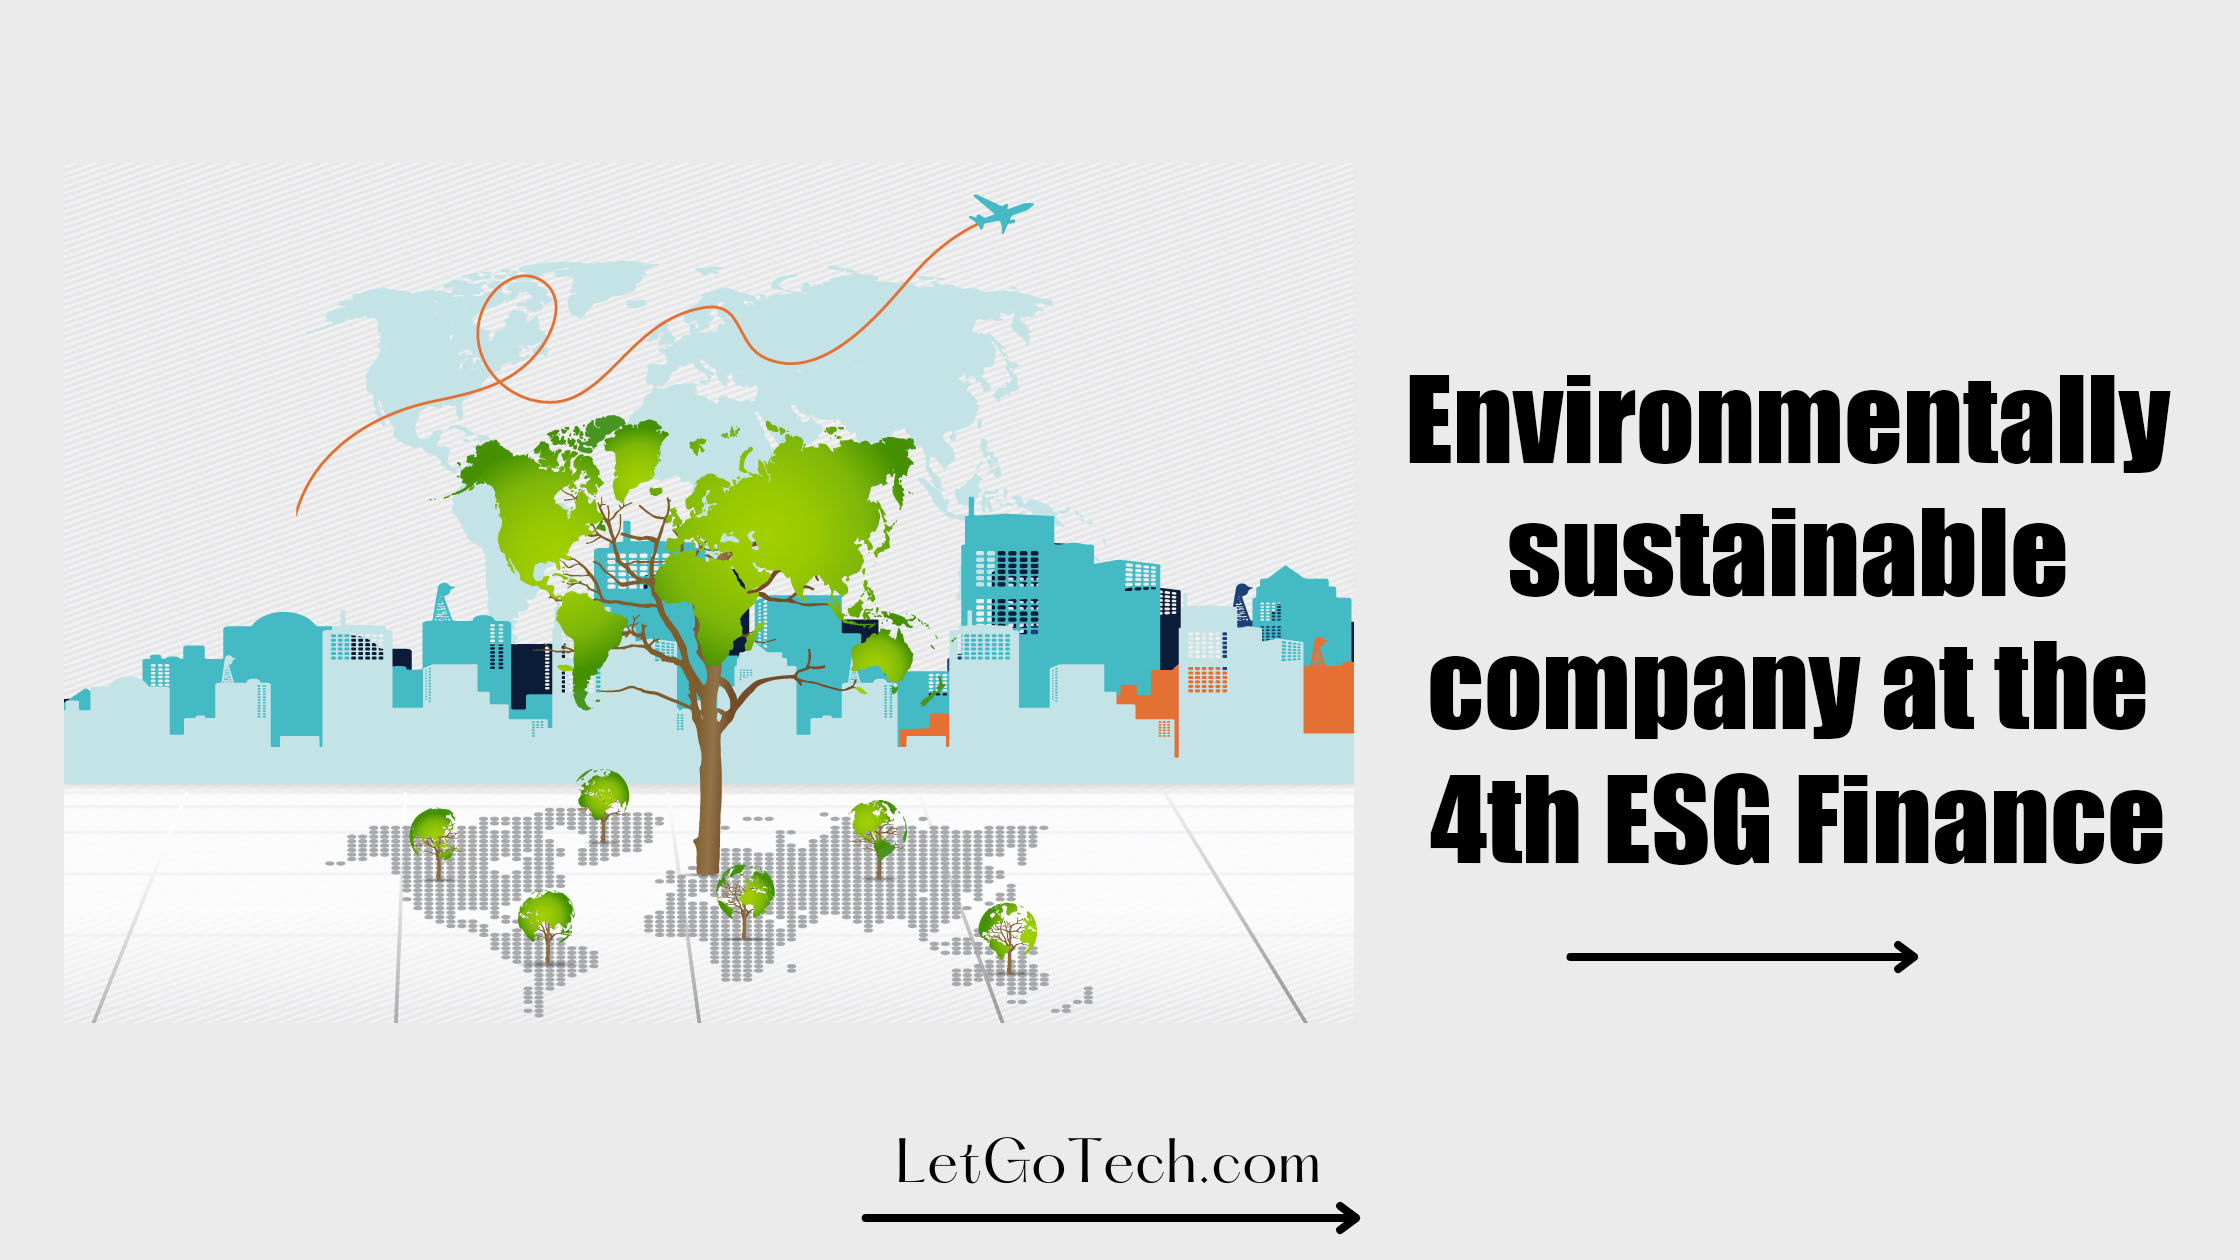 Environmentally sustainable company at the 4th ESG Finance